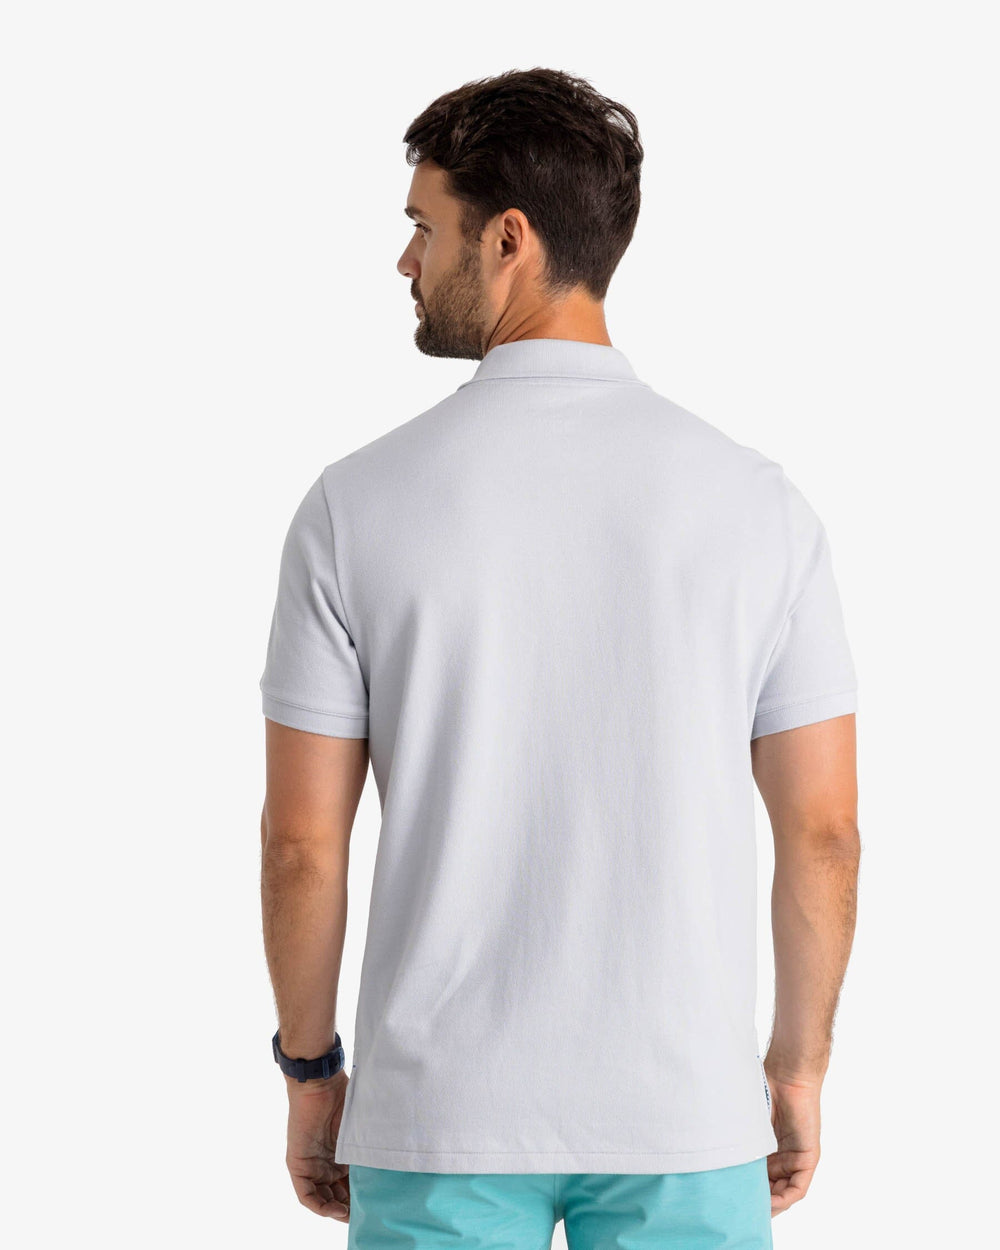 The model back view of the Men's New Skipjack Polo Shirt by Southern Tide - Slate Grey